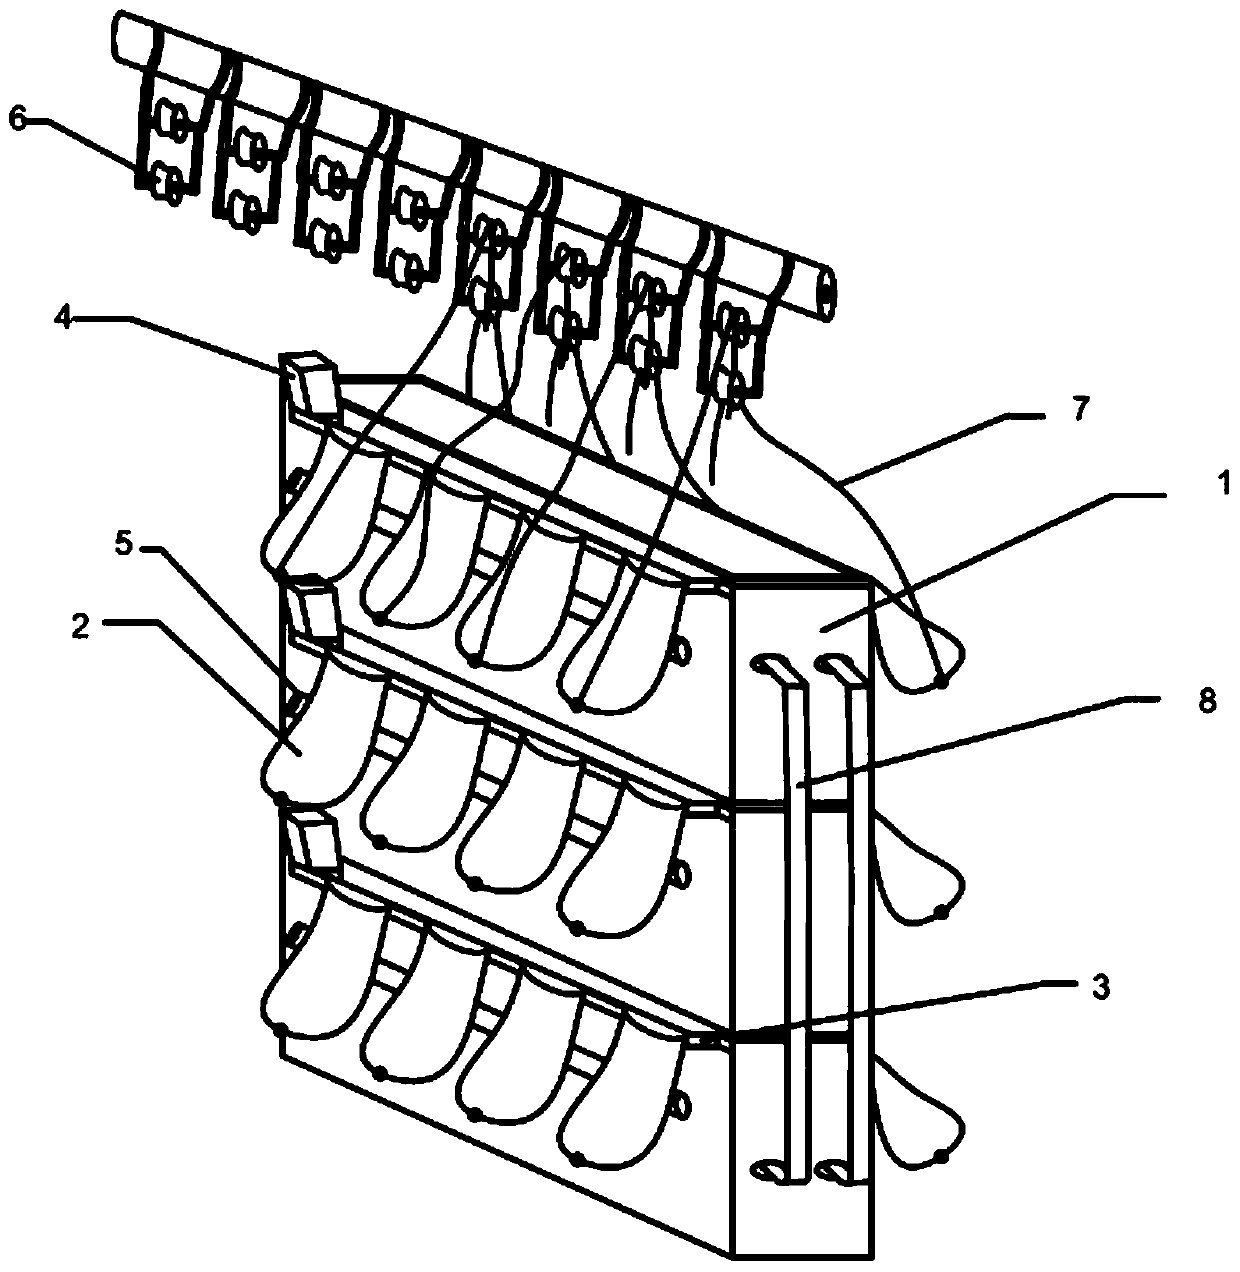 Crayfish burrowing system for three-dimensional cultivation